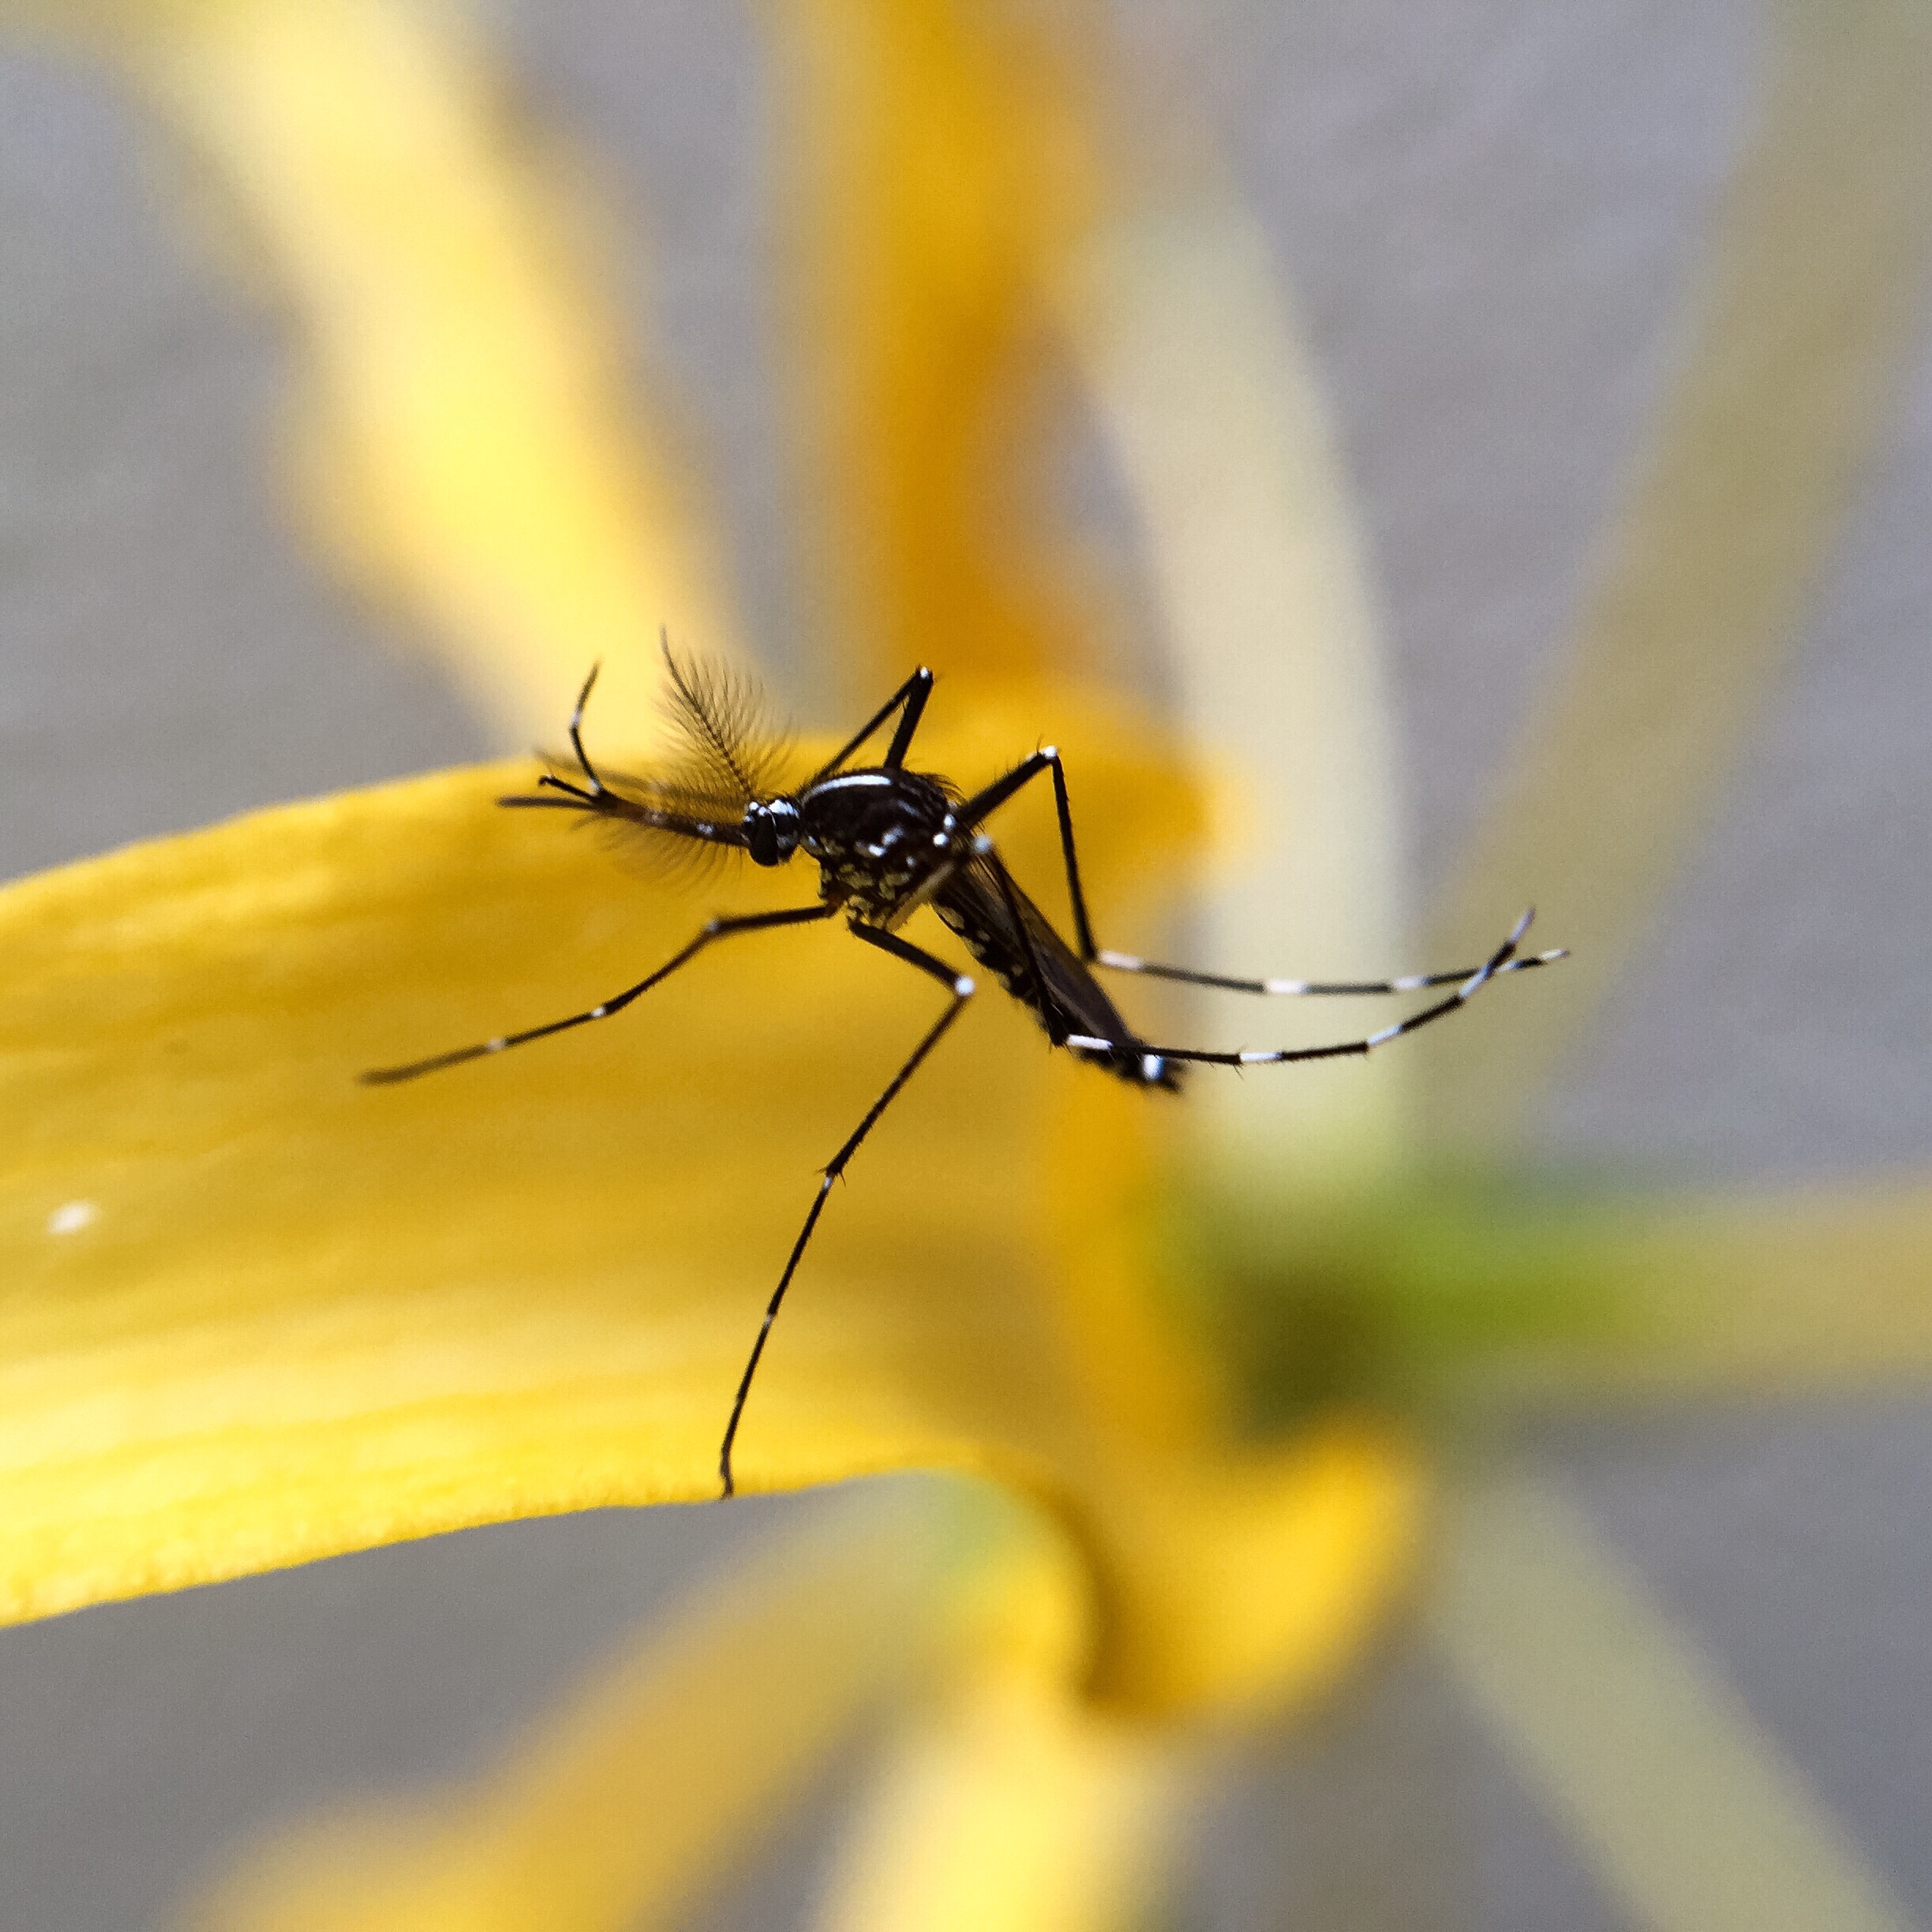 mosquito on flower